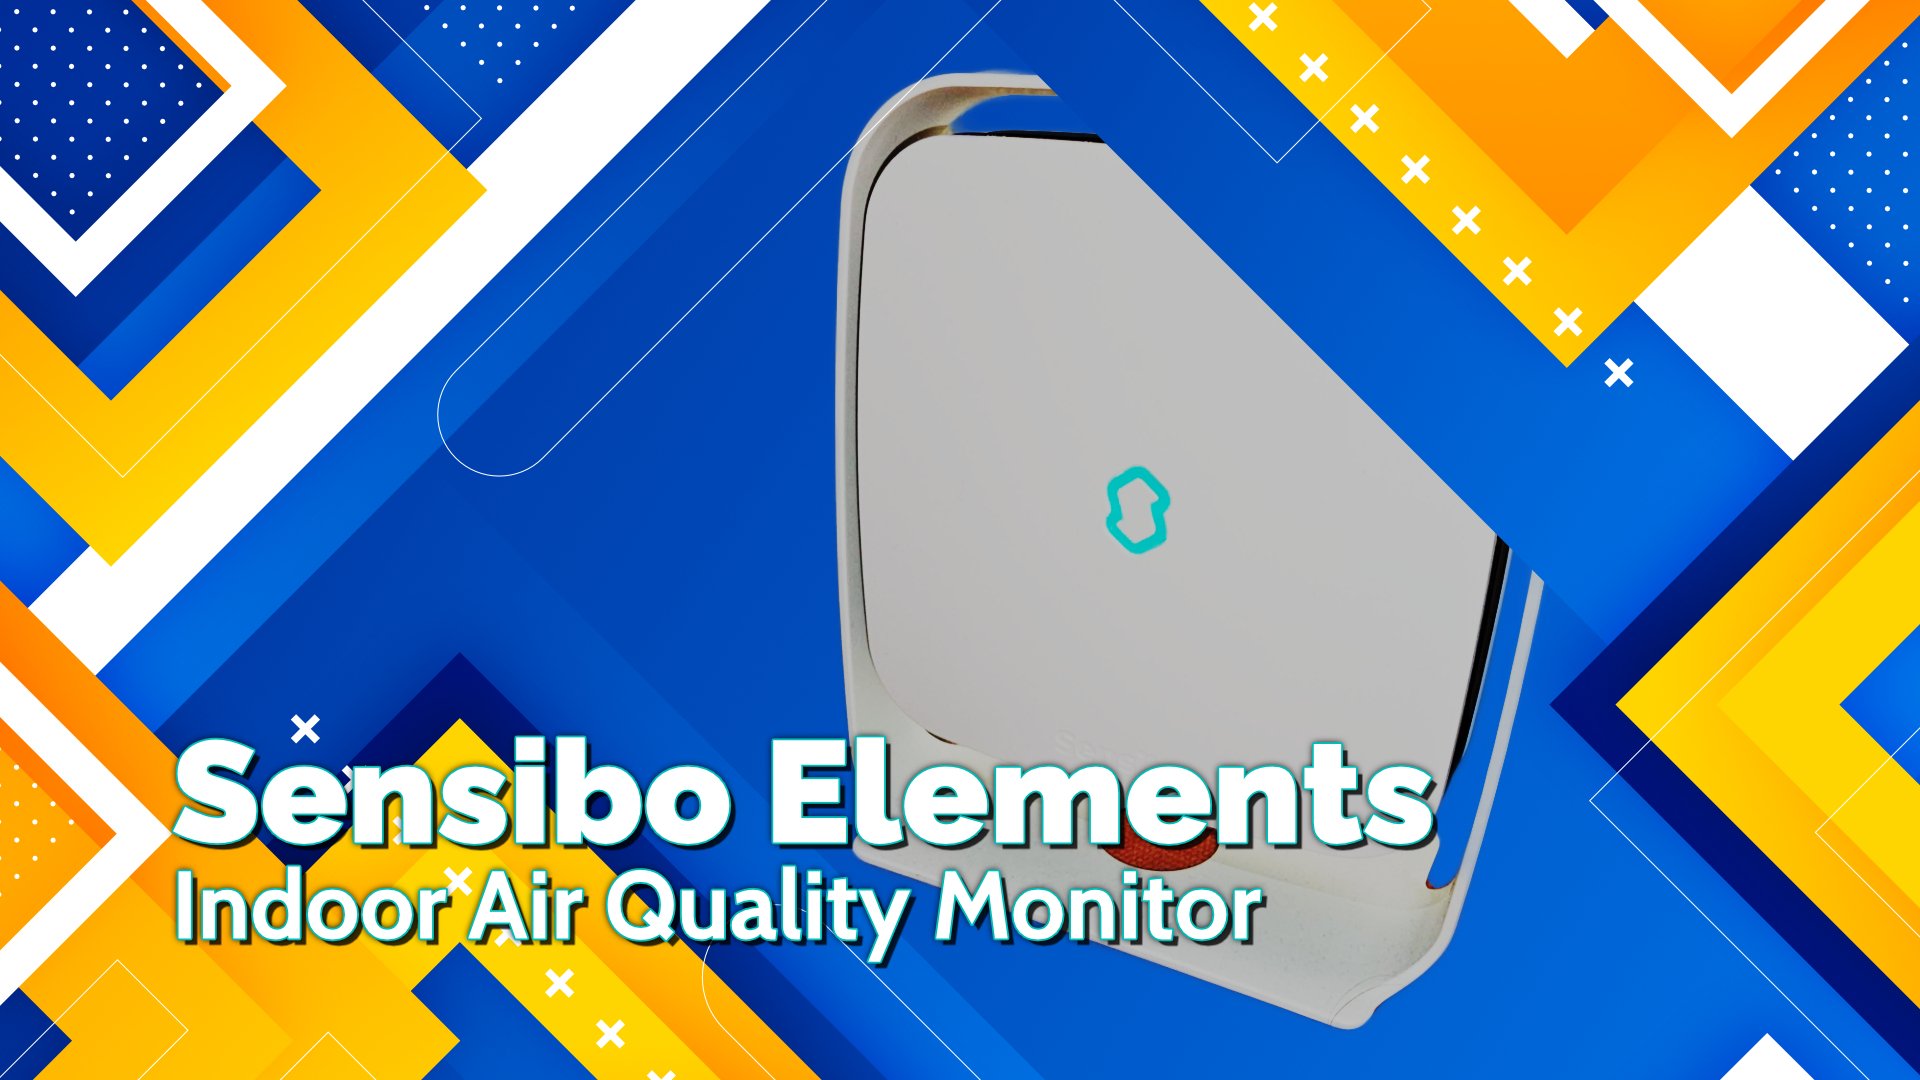 Sensibo Elements review: This smart air quality monitor can react